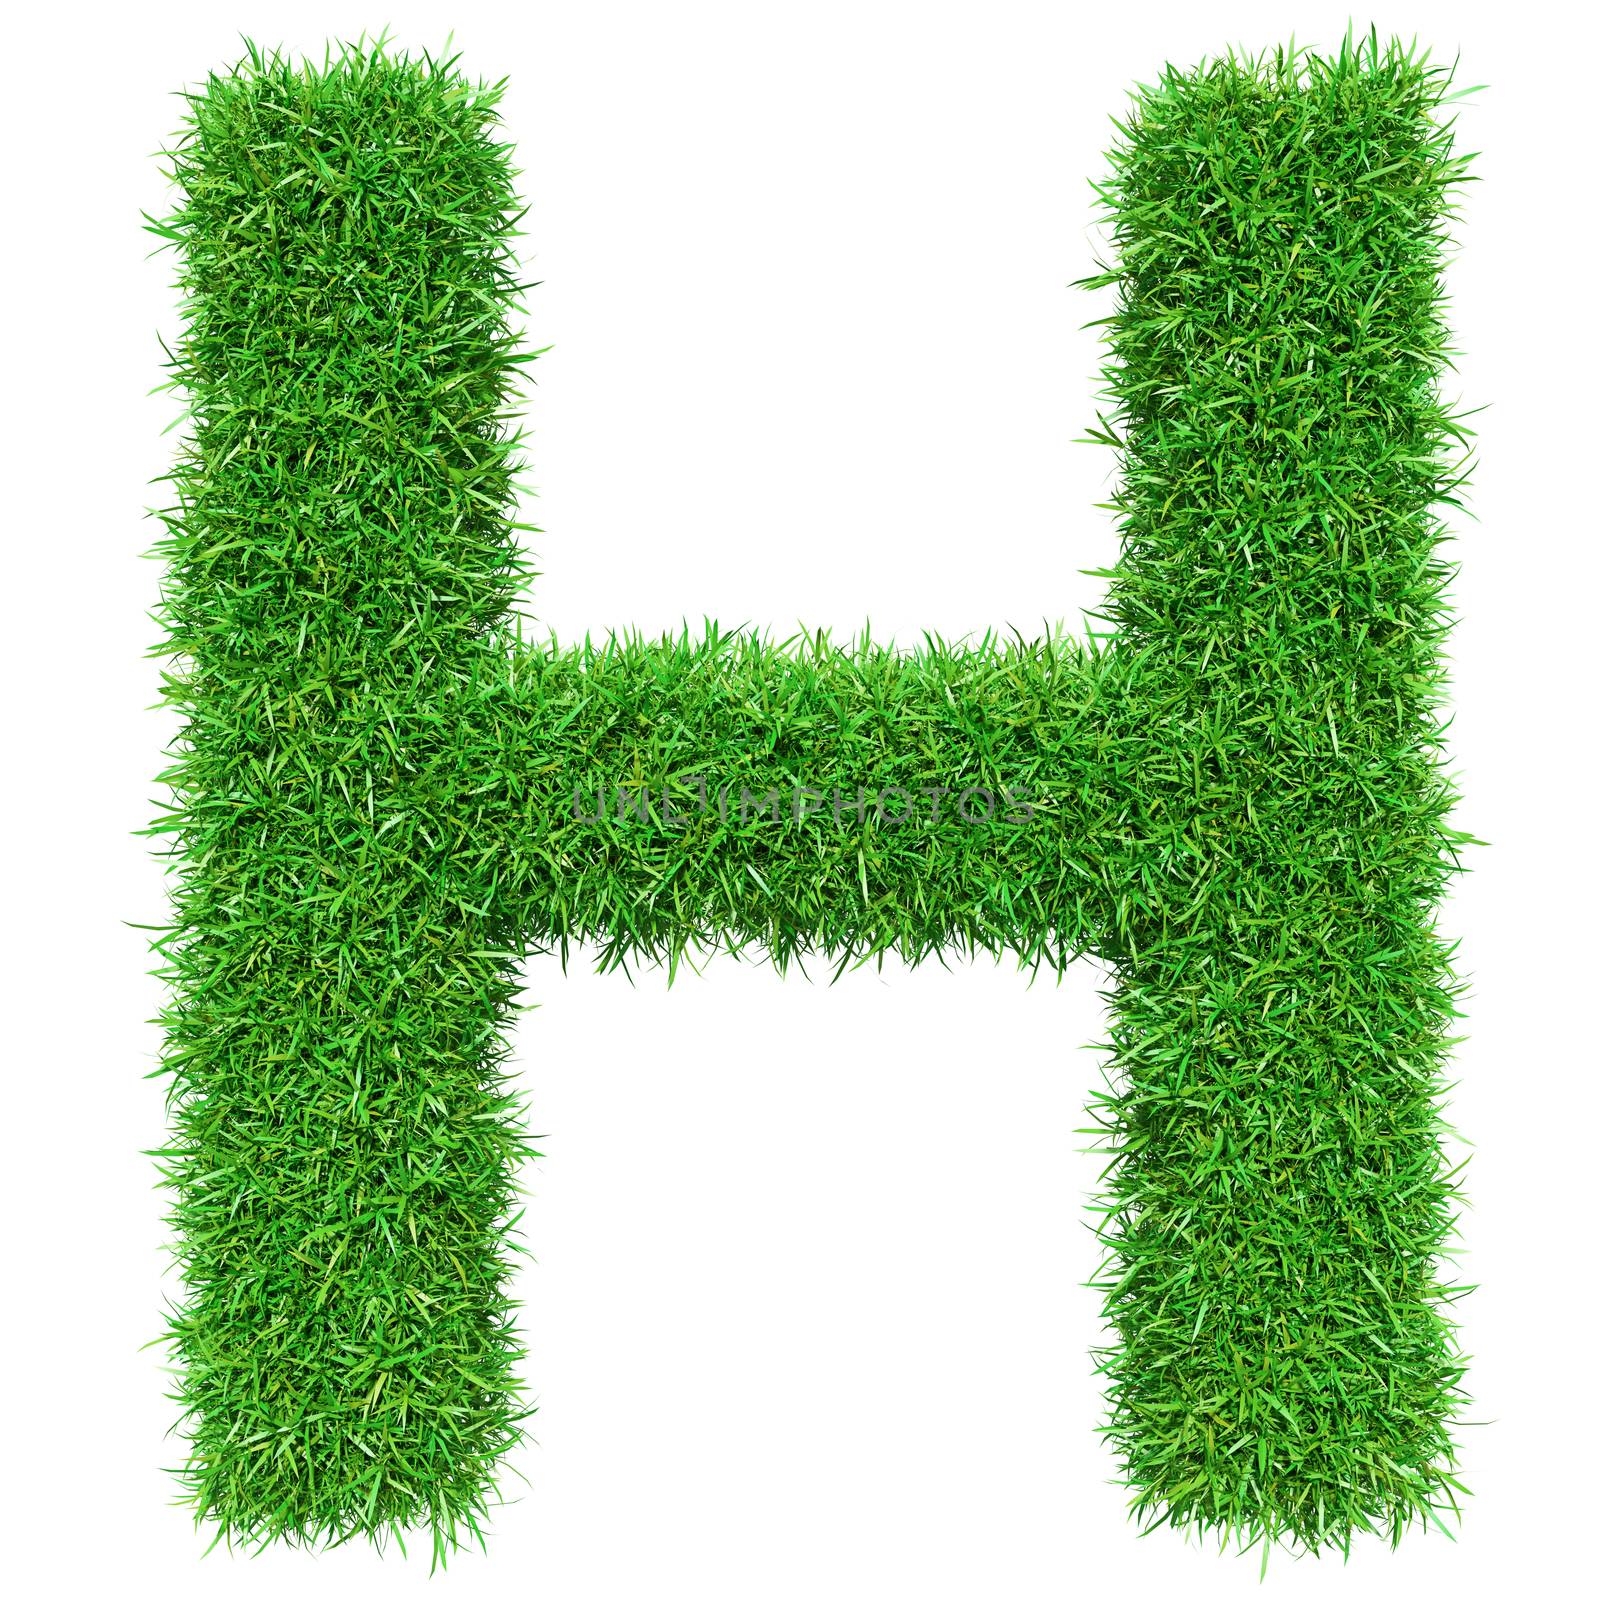 Green Grass Letter H. Isolated On White Background. Font For Your Design. 3D Illustration